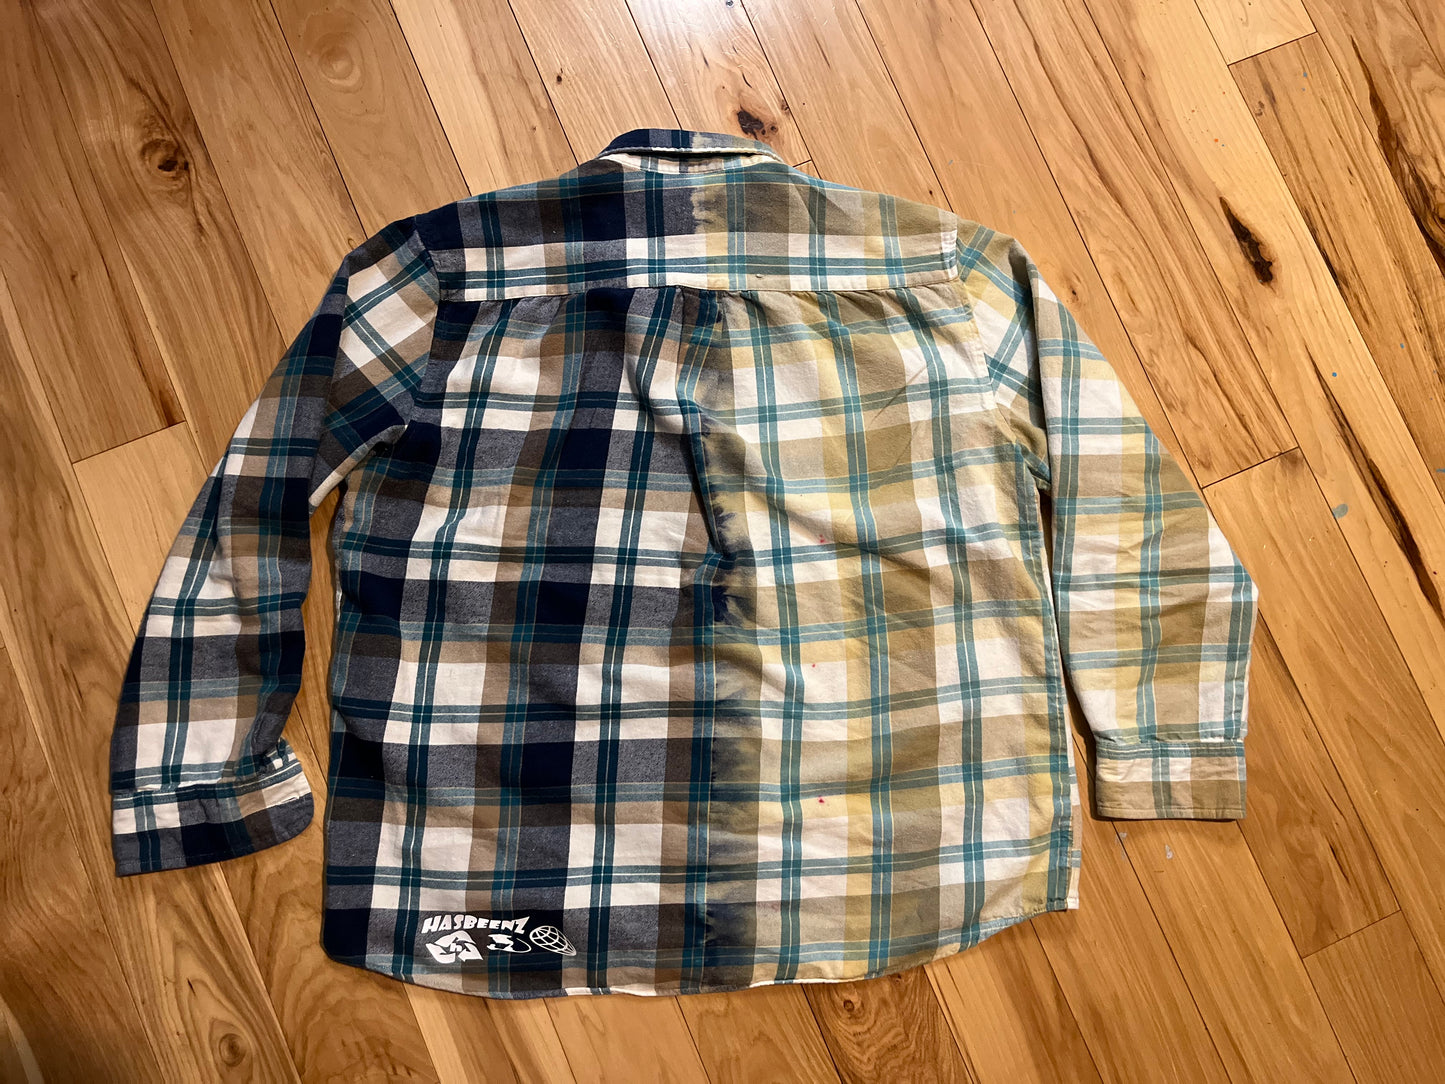 Hasbeenz Half Dyed Flannel